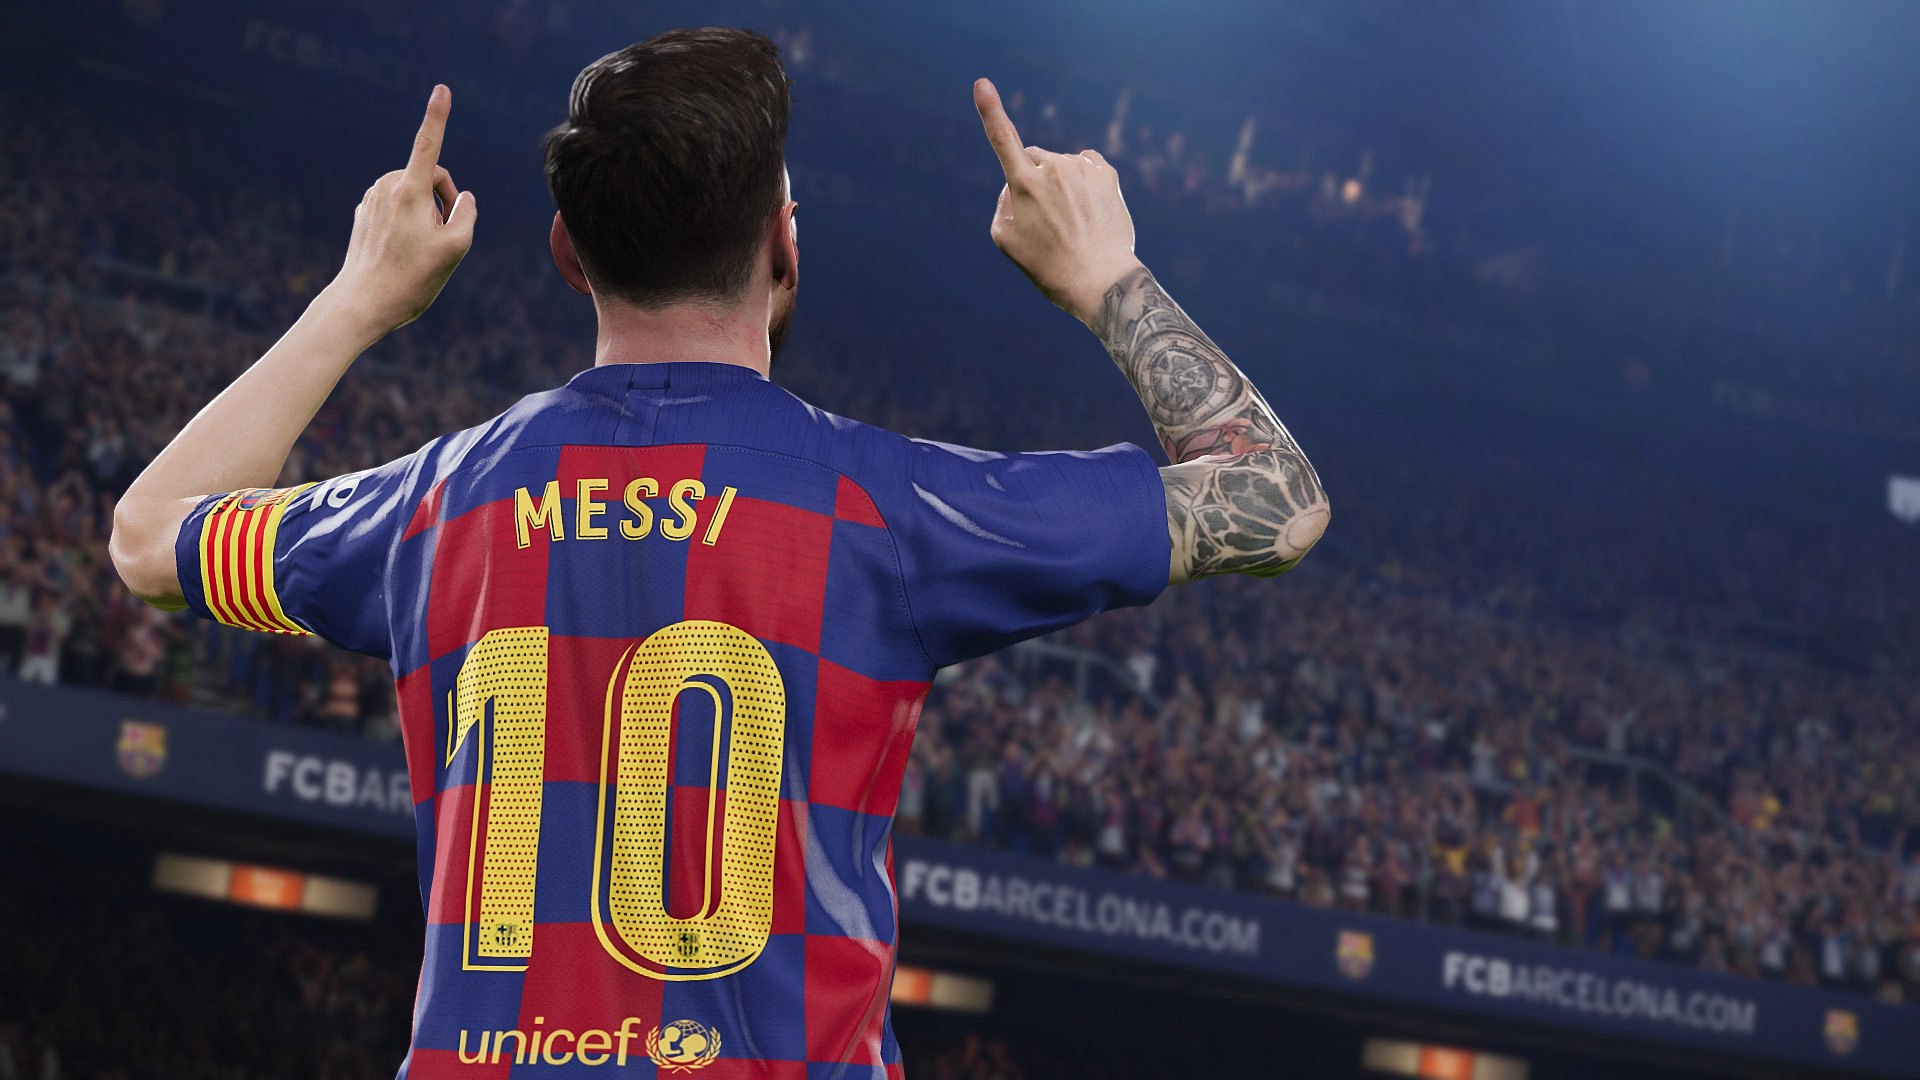 eFootball PES 2020 PlayStation 4 Account pixelpuffin.net Activation Link 13.55 $